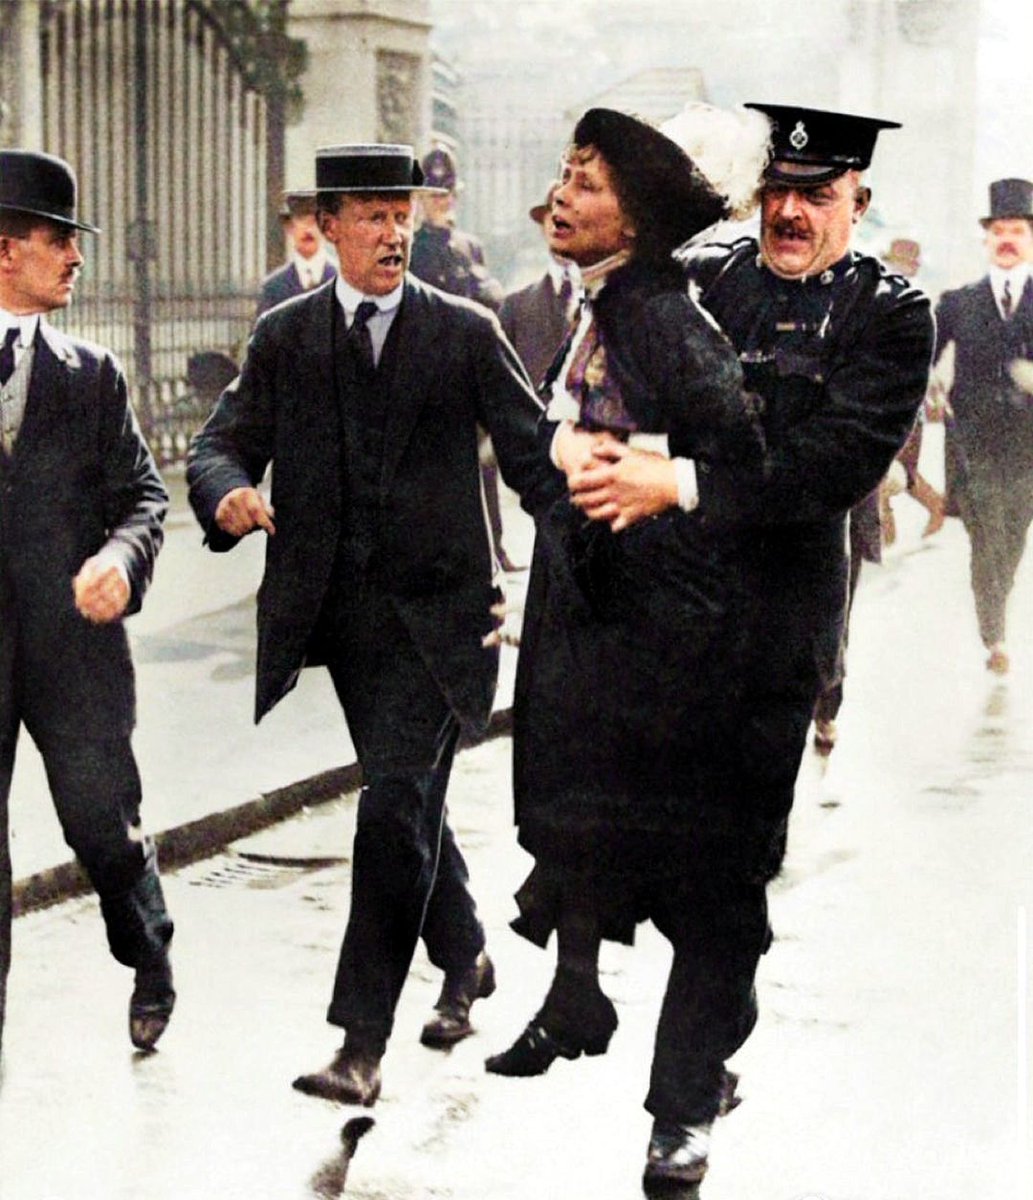 Suffragette leader Emmeline Pankhurst being carried away from Buckingham Palace in London after being arrested while trying to present a petition to King George V in 1914. #emmelinepankhurst #suffragette